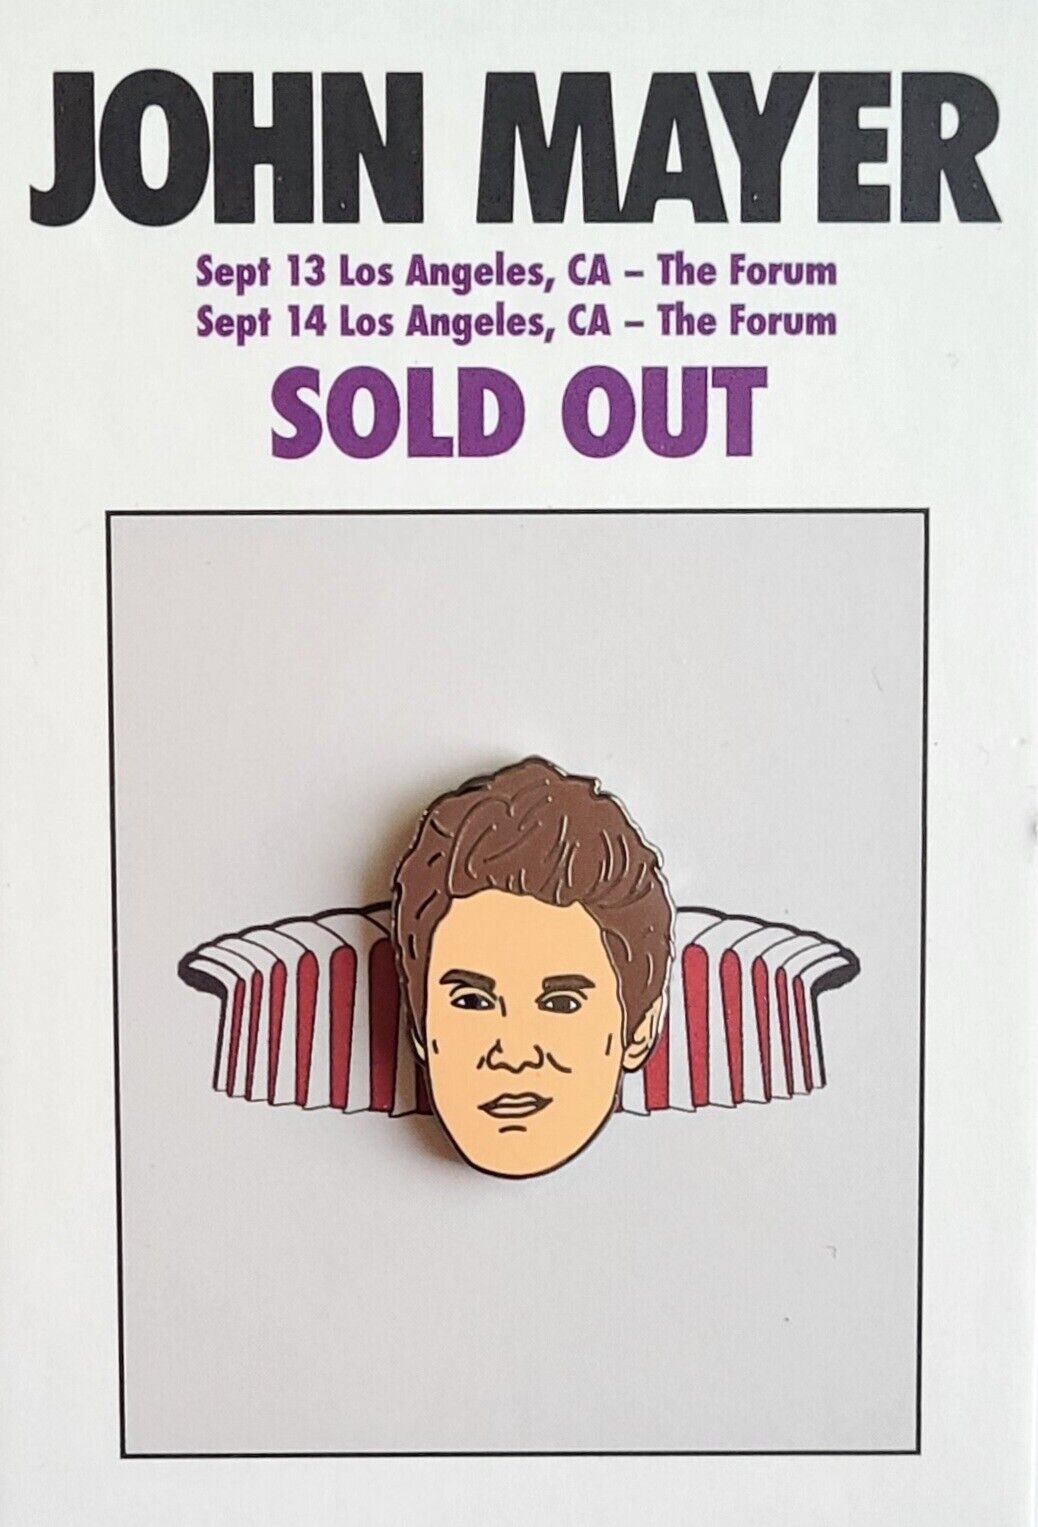 ⚡RARE⚡ PINTRILL x CHASE 2019 TOUR JOHN MAYER PIN *BRAND NEW* LIMITED EDITION 🎵